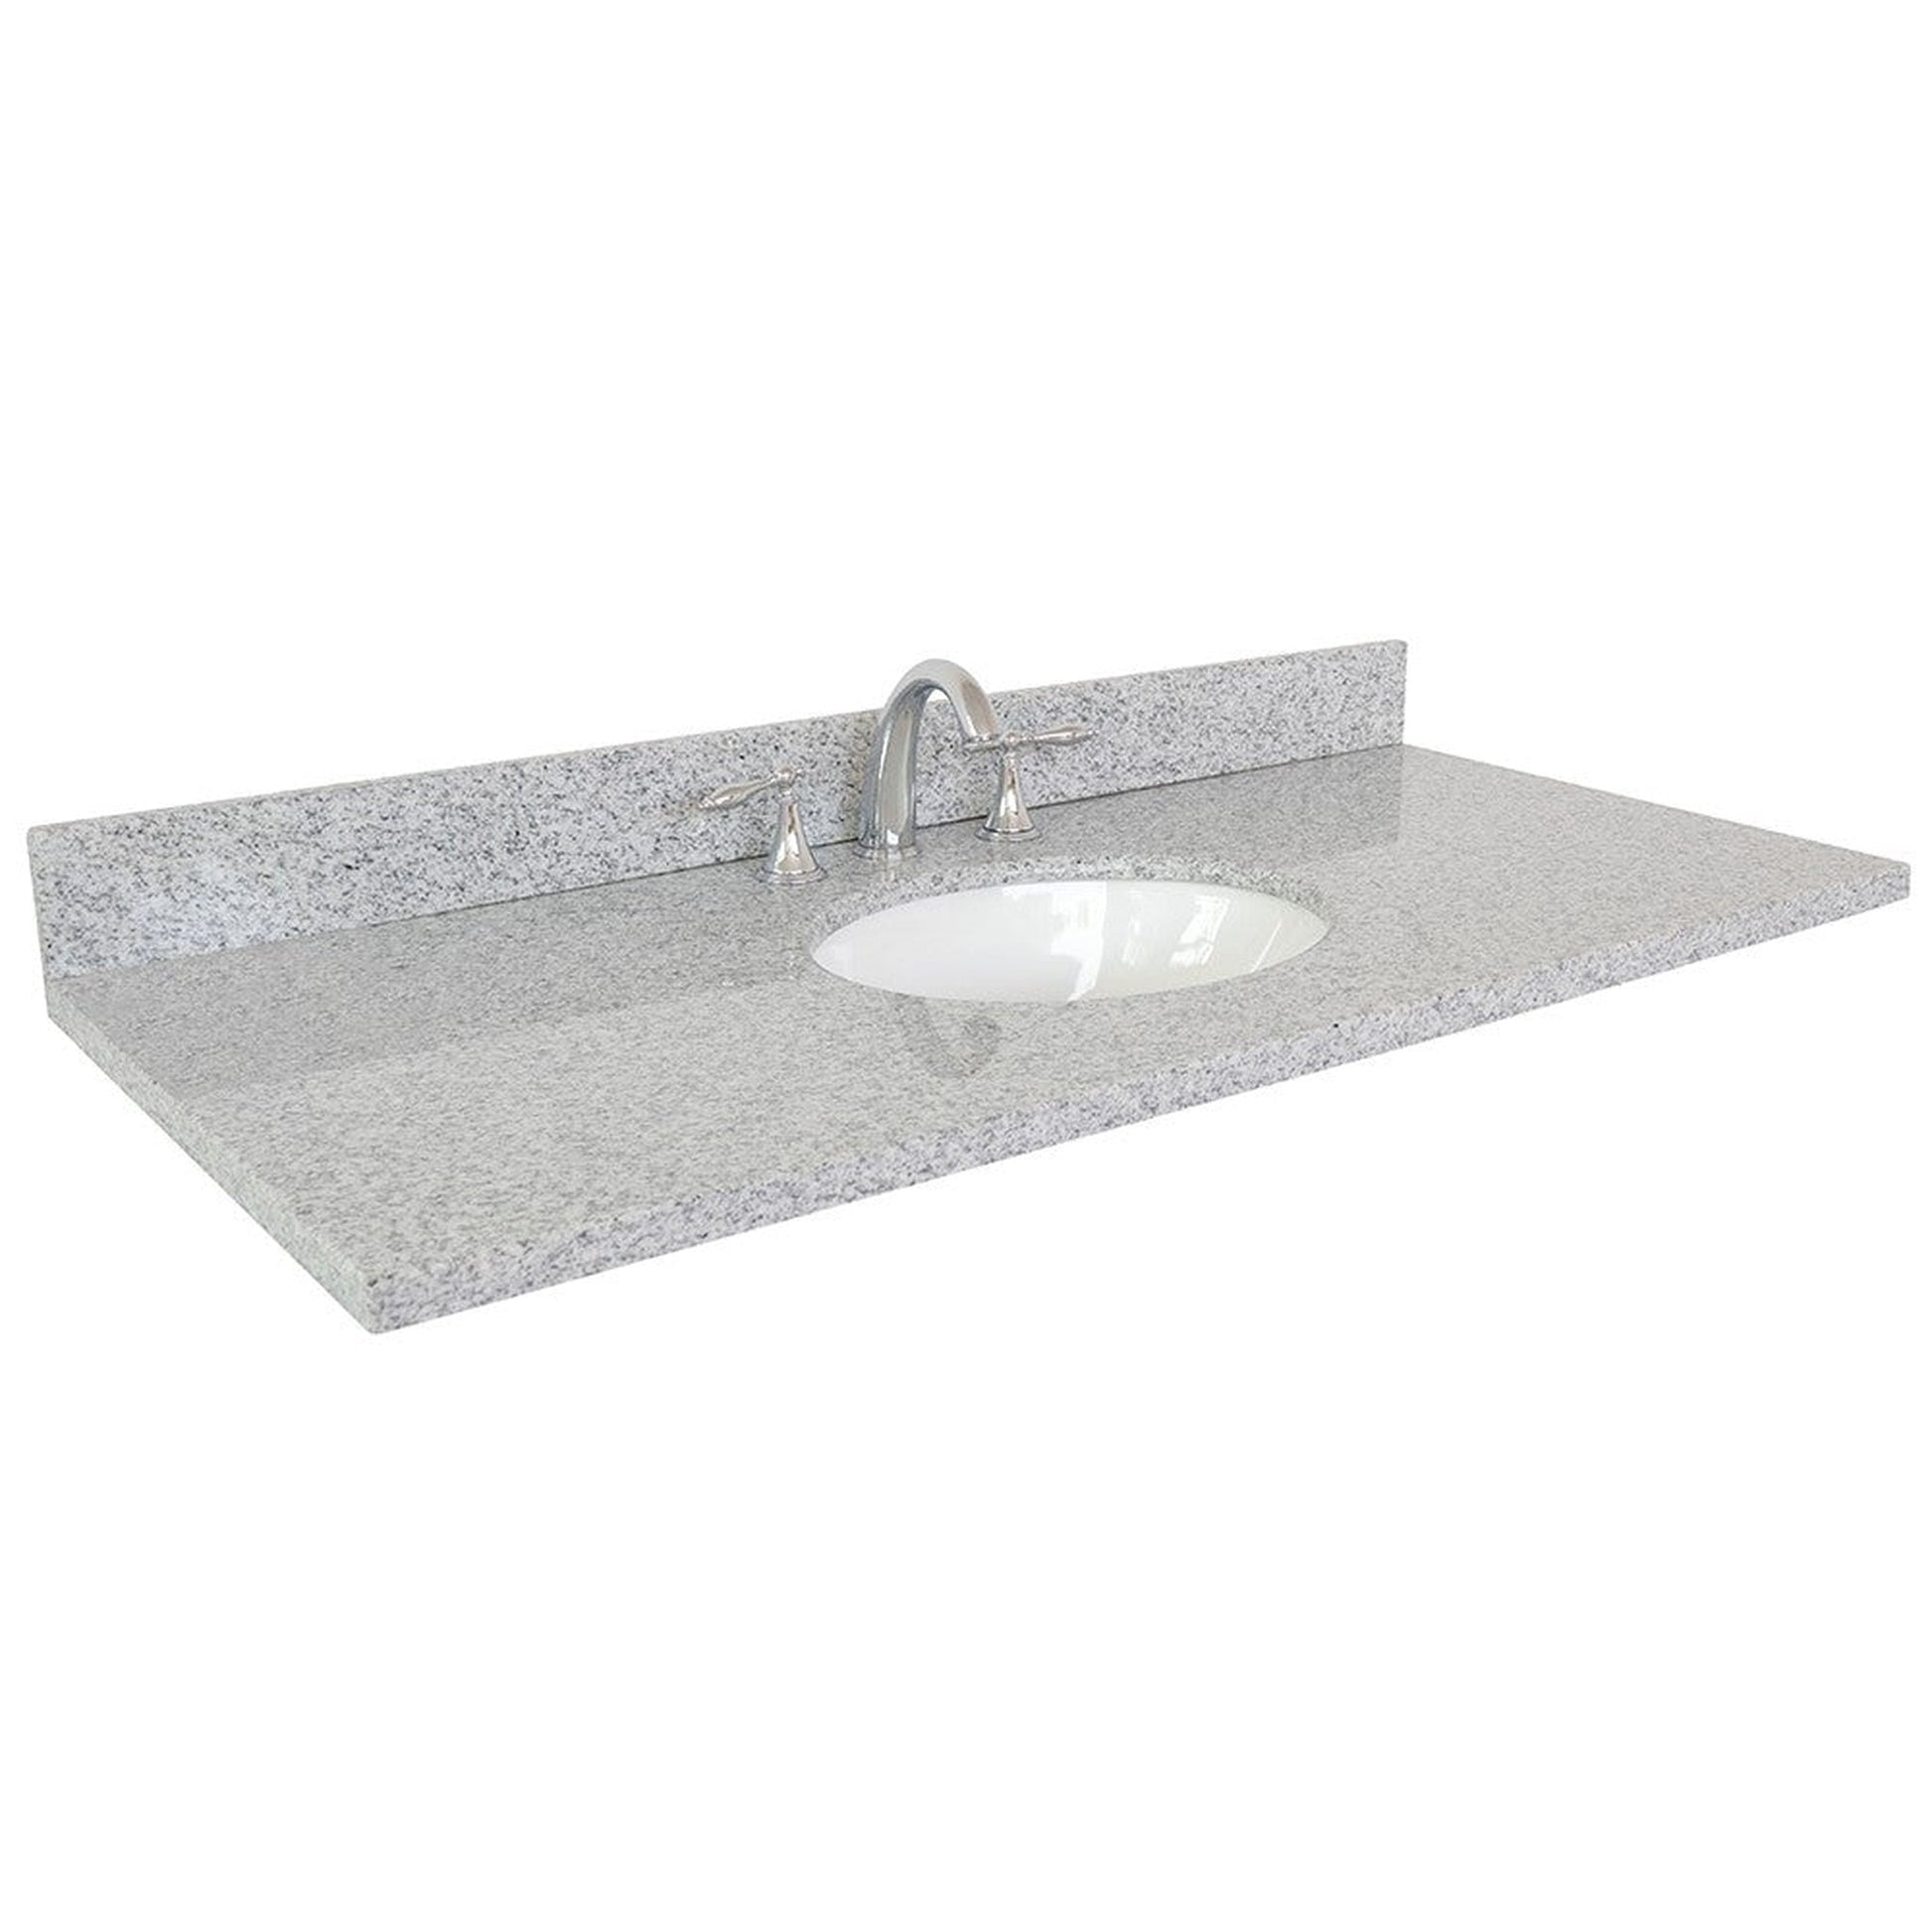 Bellaterra Home 49" x 22" Gray Granite Three Hole Vanity Top With Undermount Oval Sink and Overflow